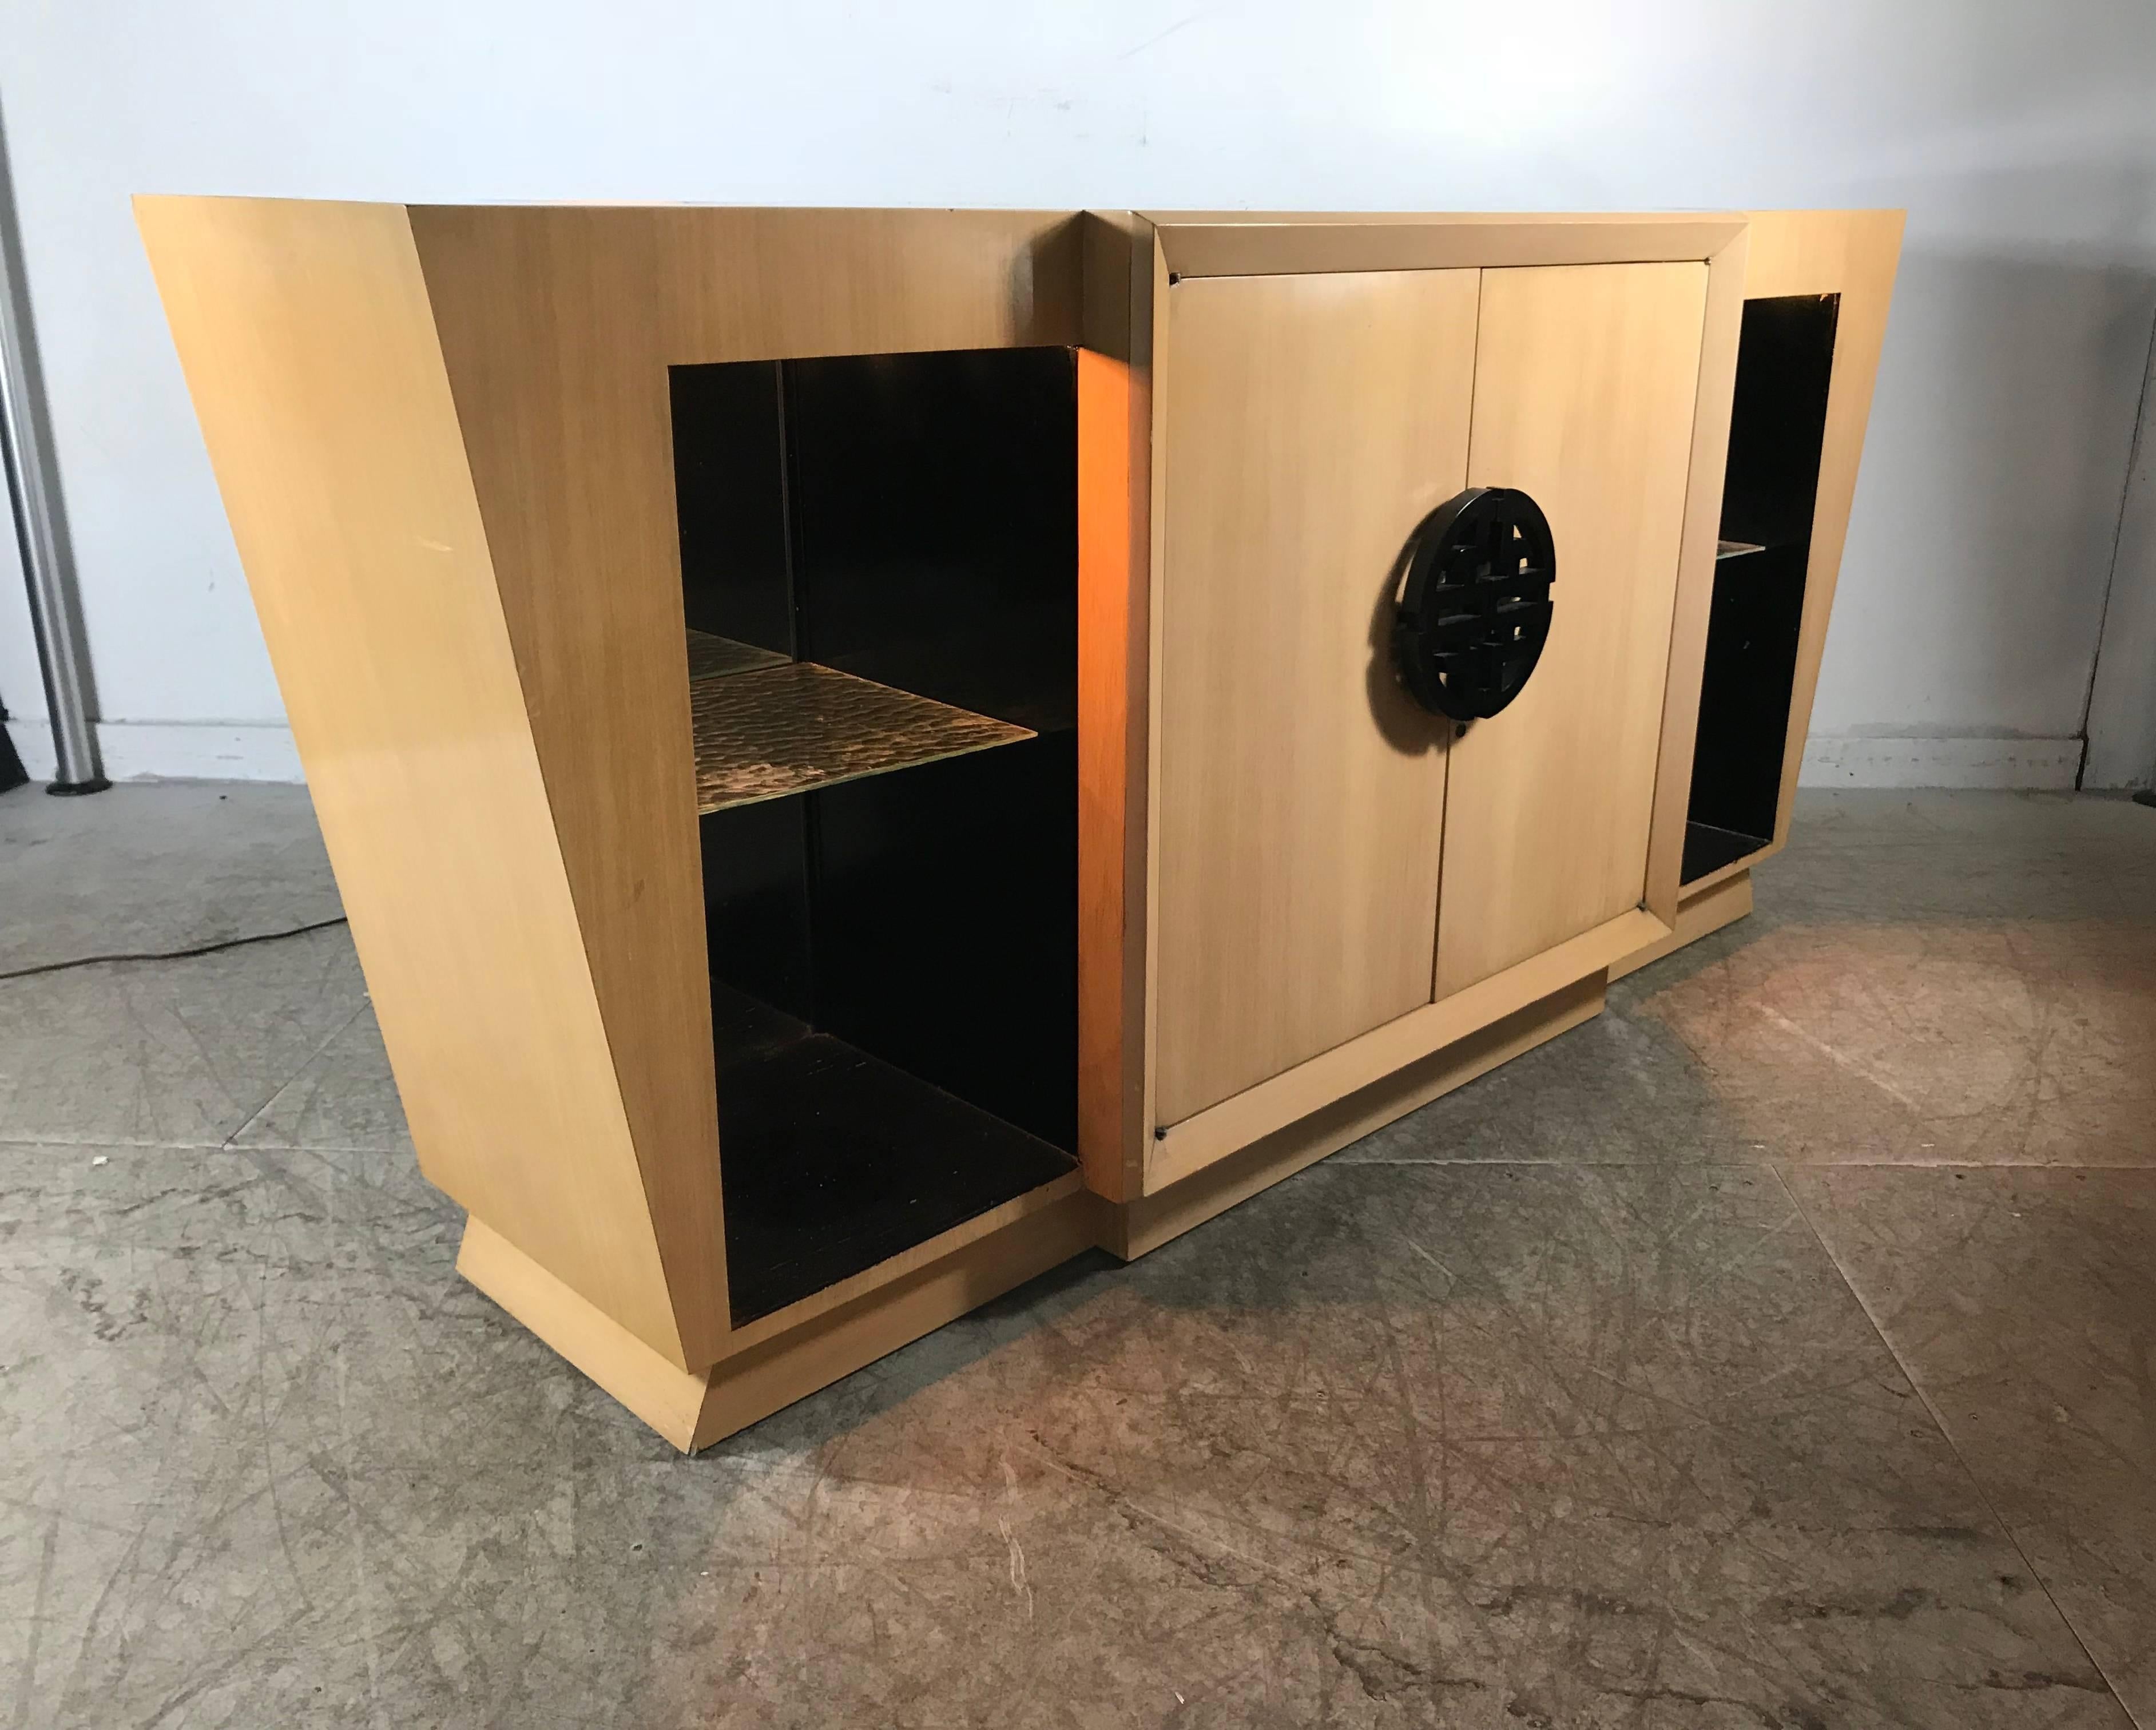 Asian Modern, Art Deco style light up dry bar or sideboard by Karpin, Maximillion Design, wonderful bleached mahogany and black lacquer. Left and right cubbies with lights which illuminate through top. Chinese black lacquer hand pull. Center doors